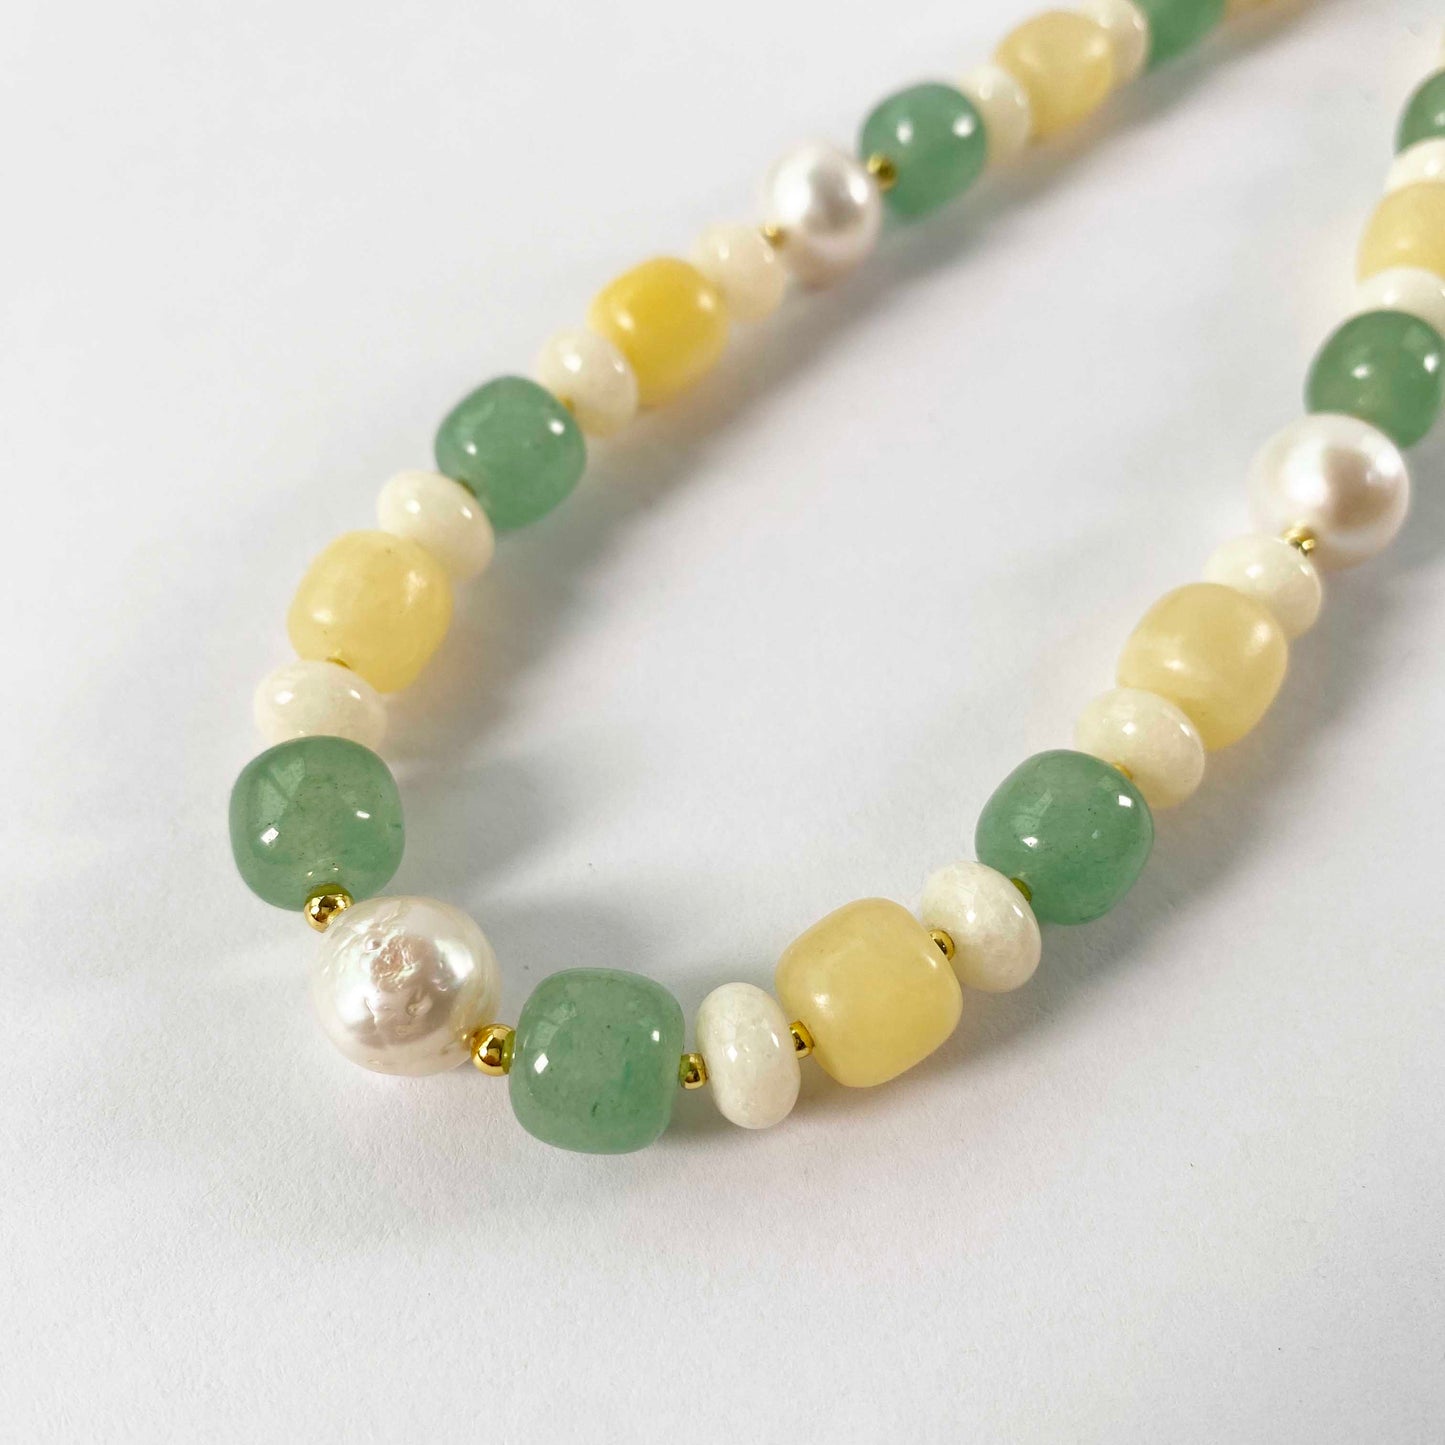 Buy Pearl Jade Necklace, 6mm White Fresh Water Pearl Green Jade Necklace,  Bride Bridesmaid Real Pearl Wedding Girls Gift Necklace Jewelry Online in  India - Etsy